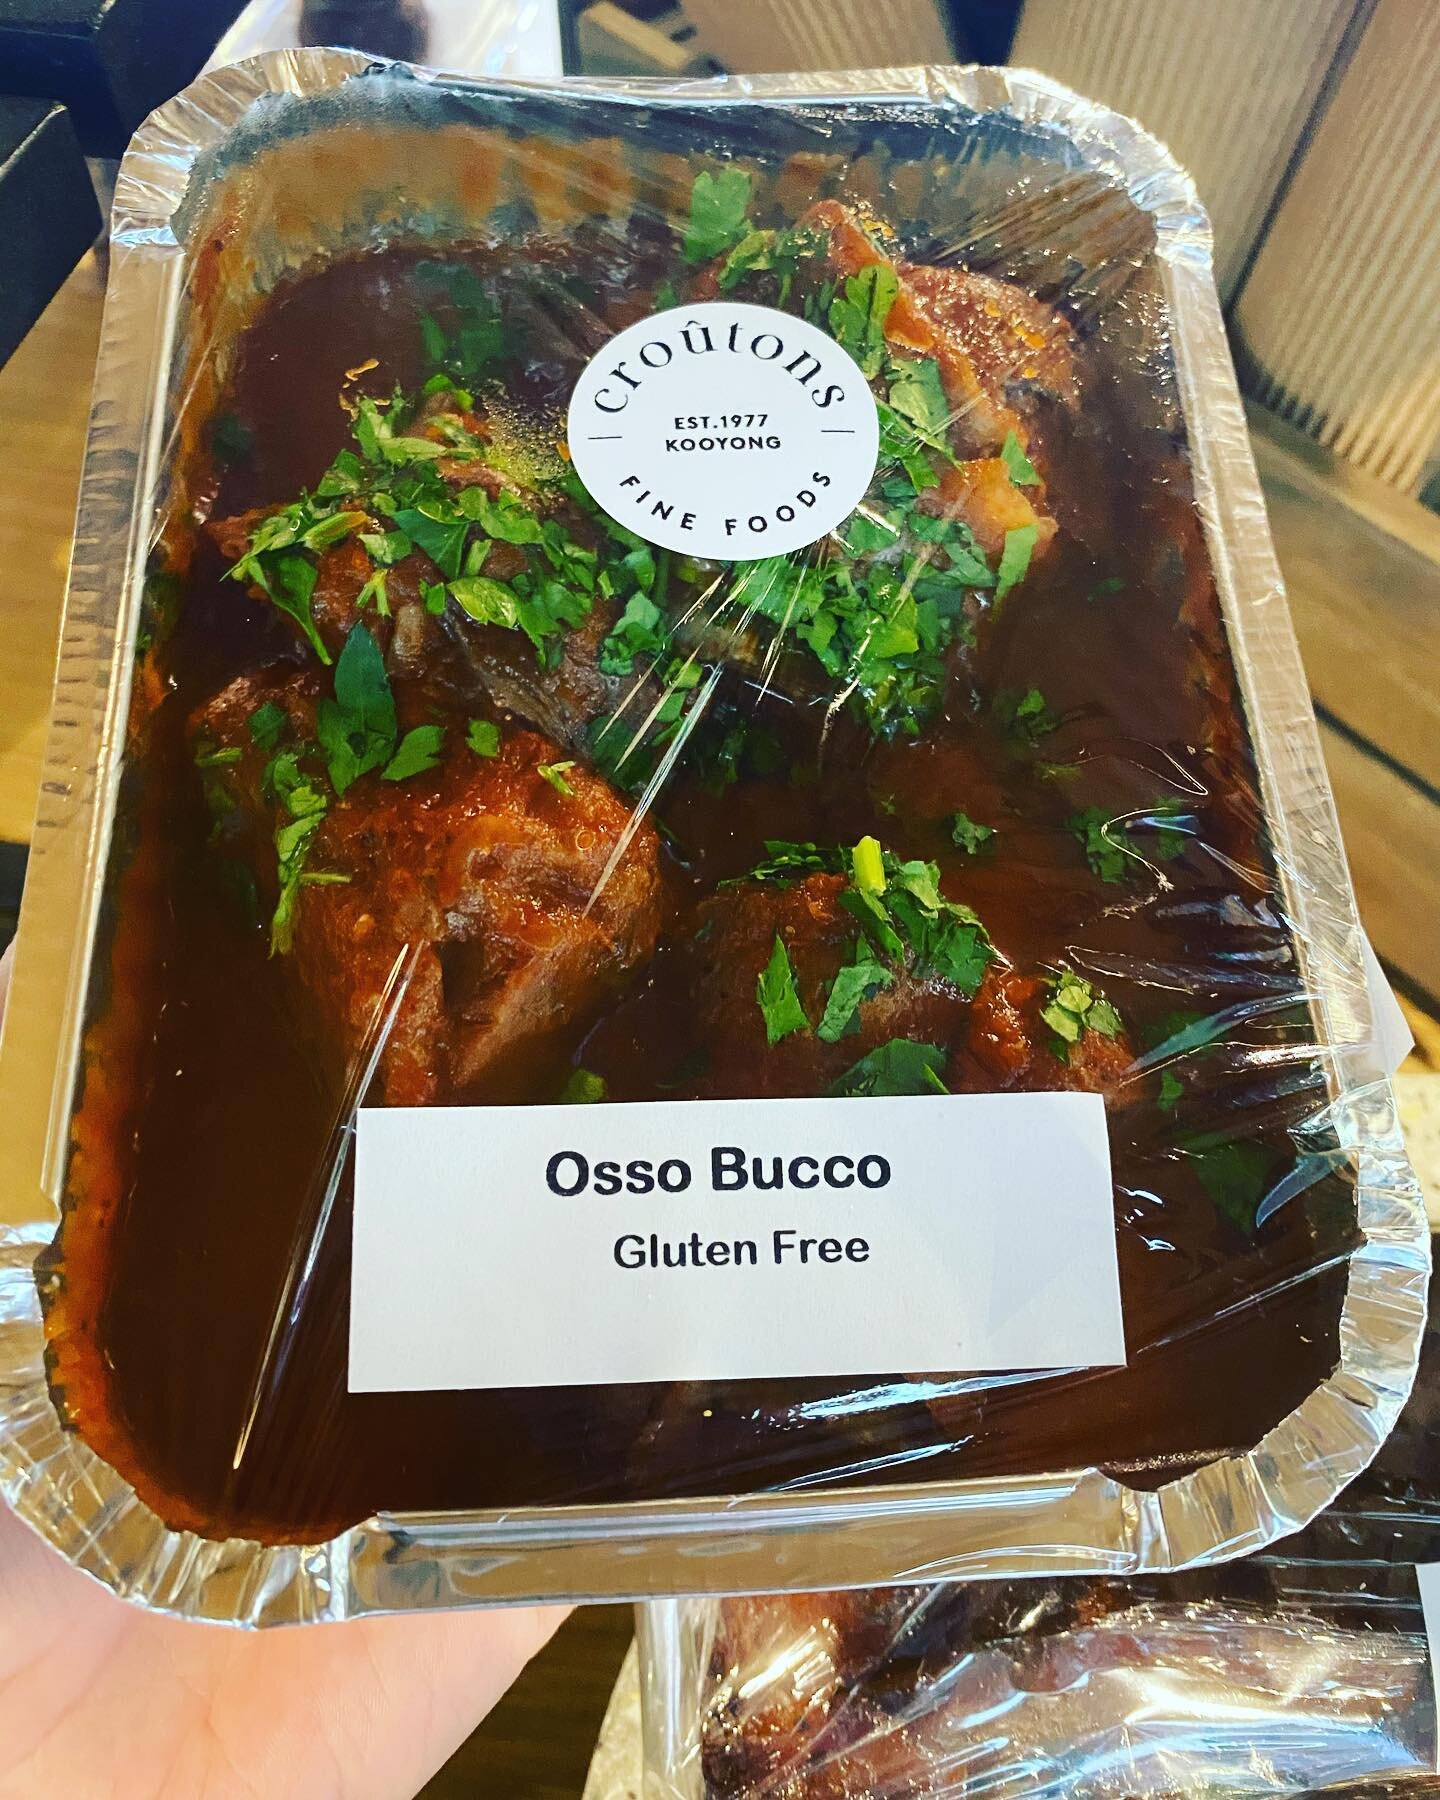 Perfect comfort food for tomorrow&rsquo;s forecast 🌧
Osso Bucco with a tomato &amp; red wine sauce has just hit the fridge.. mmmm yum
.
Reminder for 🌊🌊
Bellarine Peninsula we will be heading your way Friday October 2nd.
Free delivery Friday Octobe